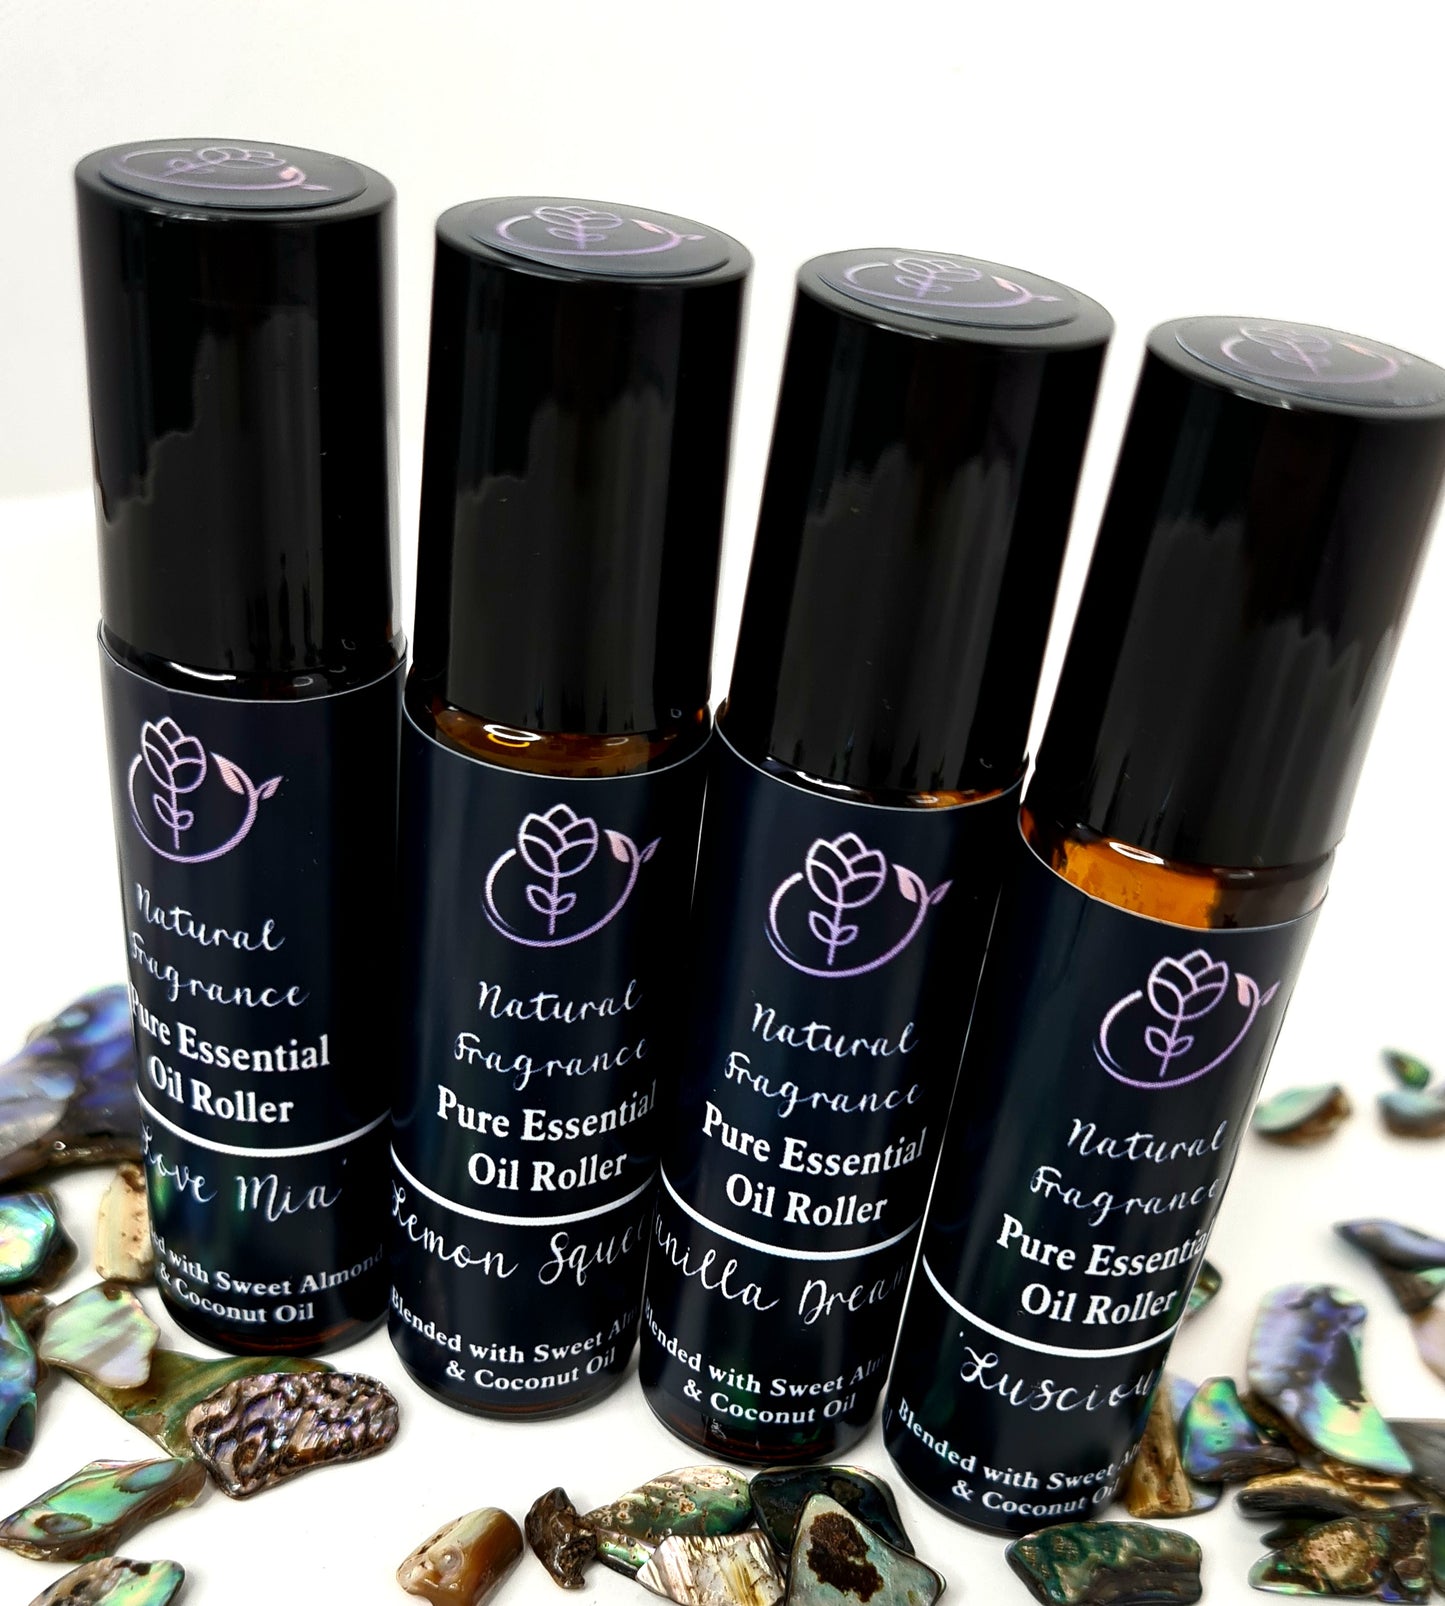 100% Pure Essential Oil Roller Blends